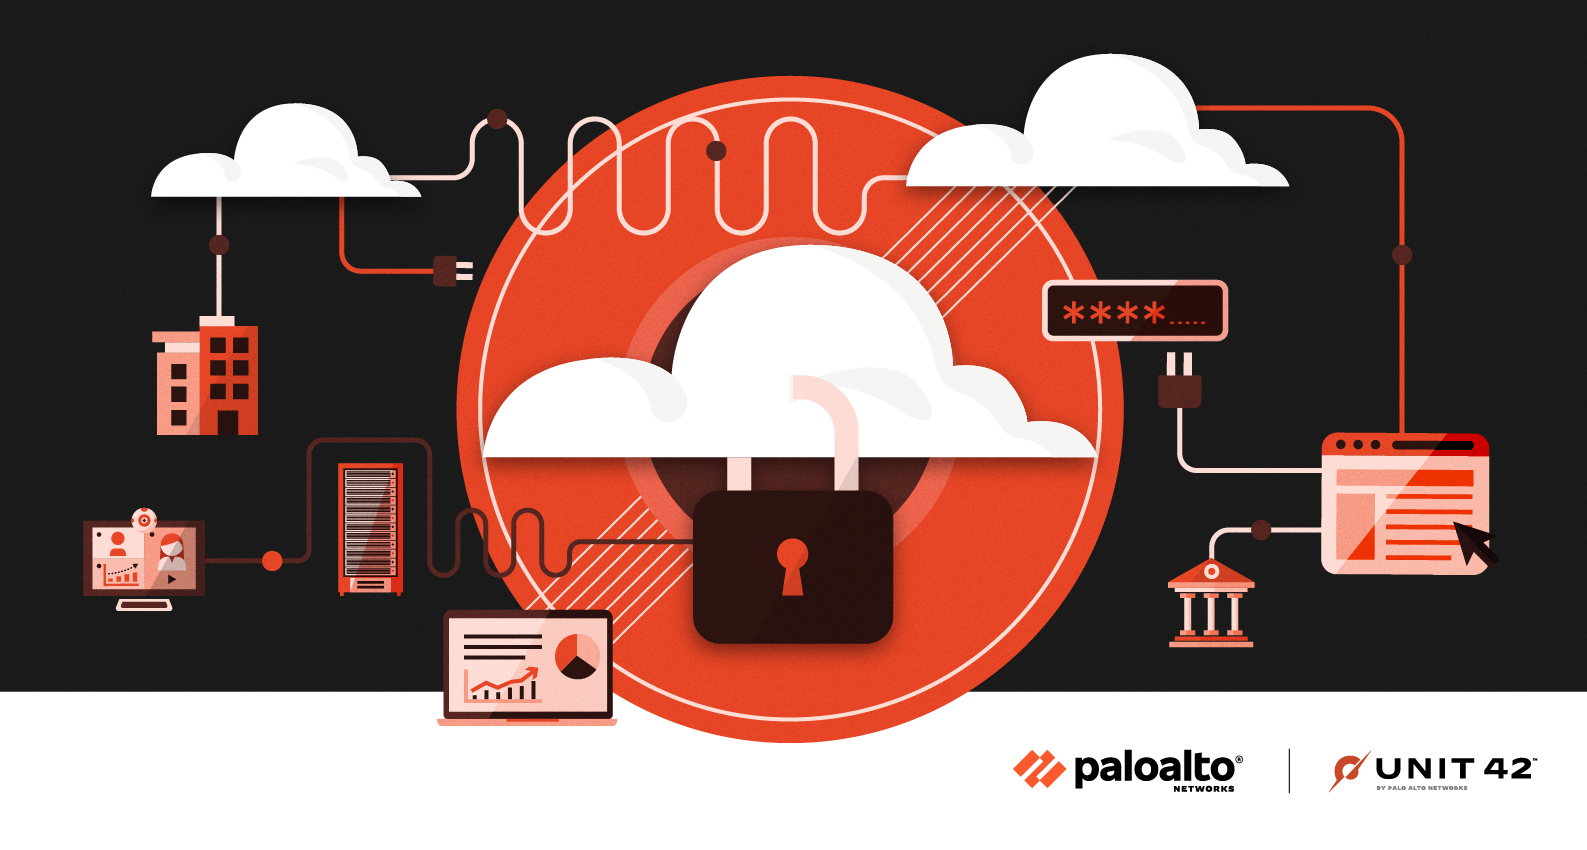 Malicious packages discovered on PyPI point to vulnerabilities in cloud ecosystems. We analyze the malicious code and suspected motivations of the threat actors.